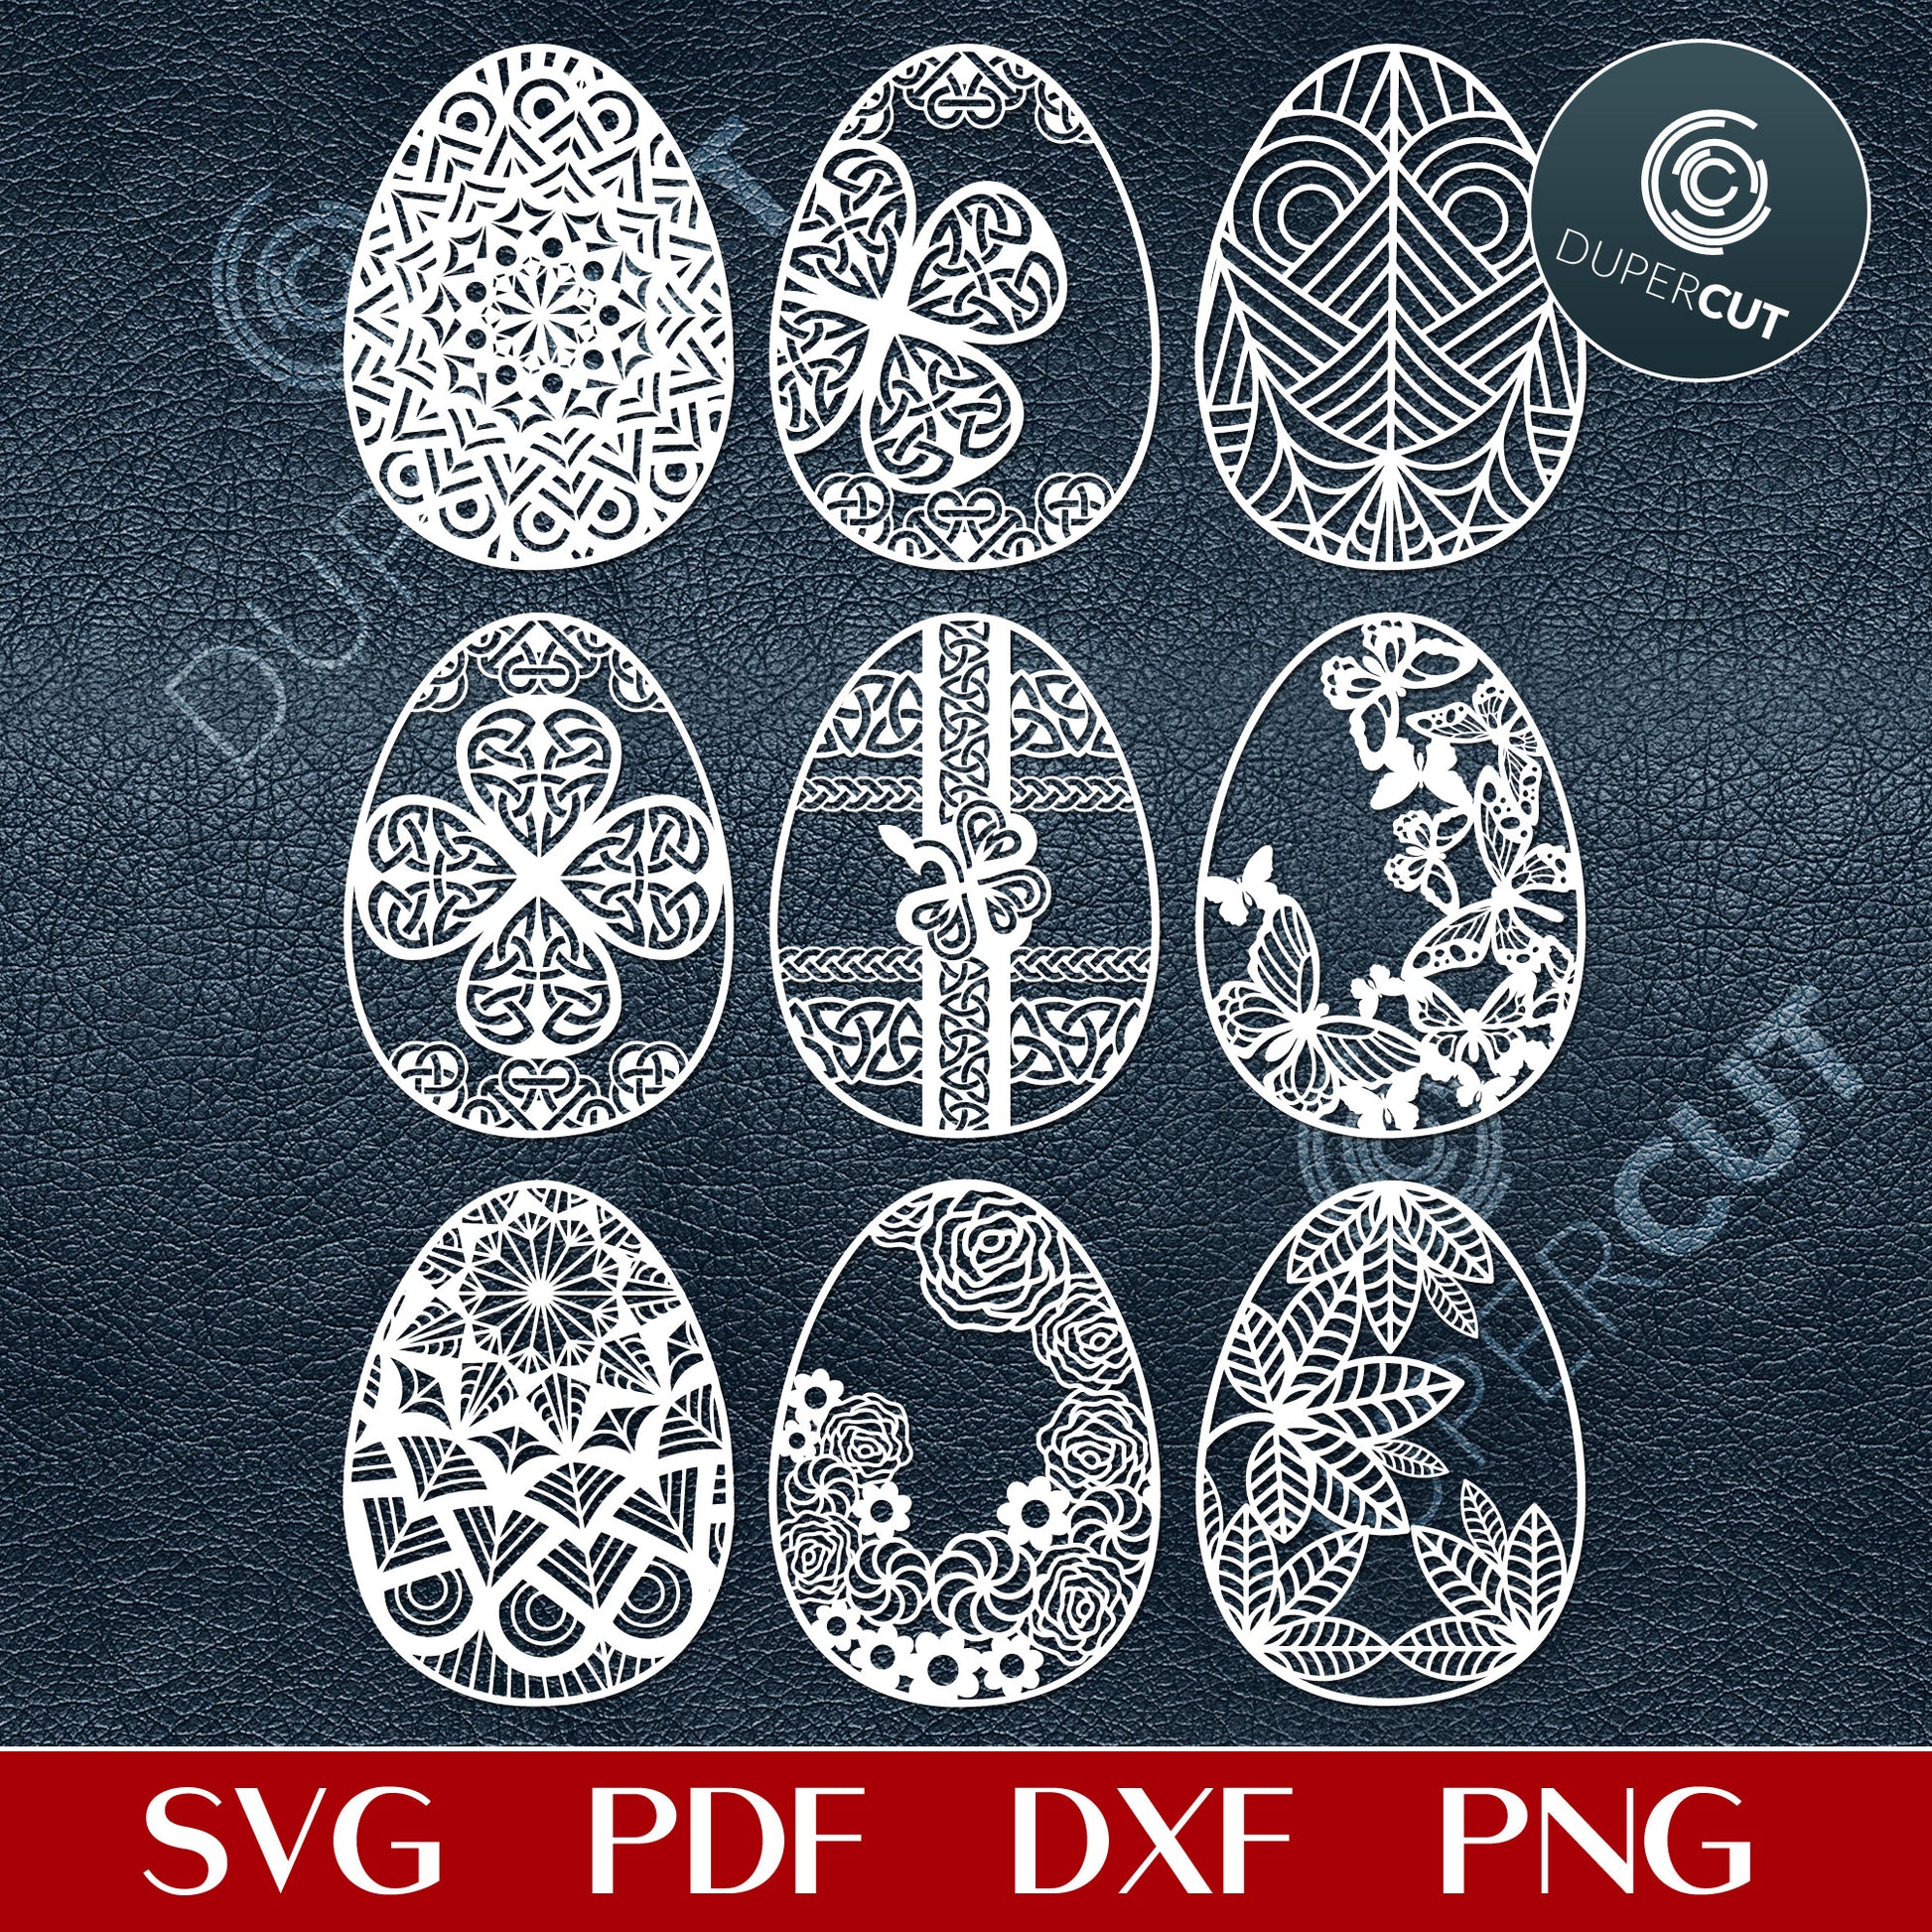 Easter Eggs bundle - SVG DXF PNG vector files for laser and CNC machines, Cricut, Silhouette Cameo, Glowforge projects. 